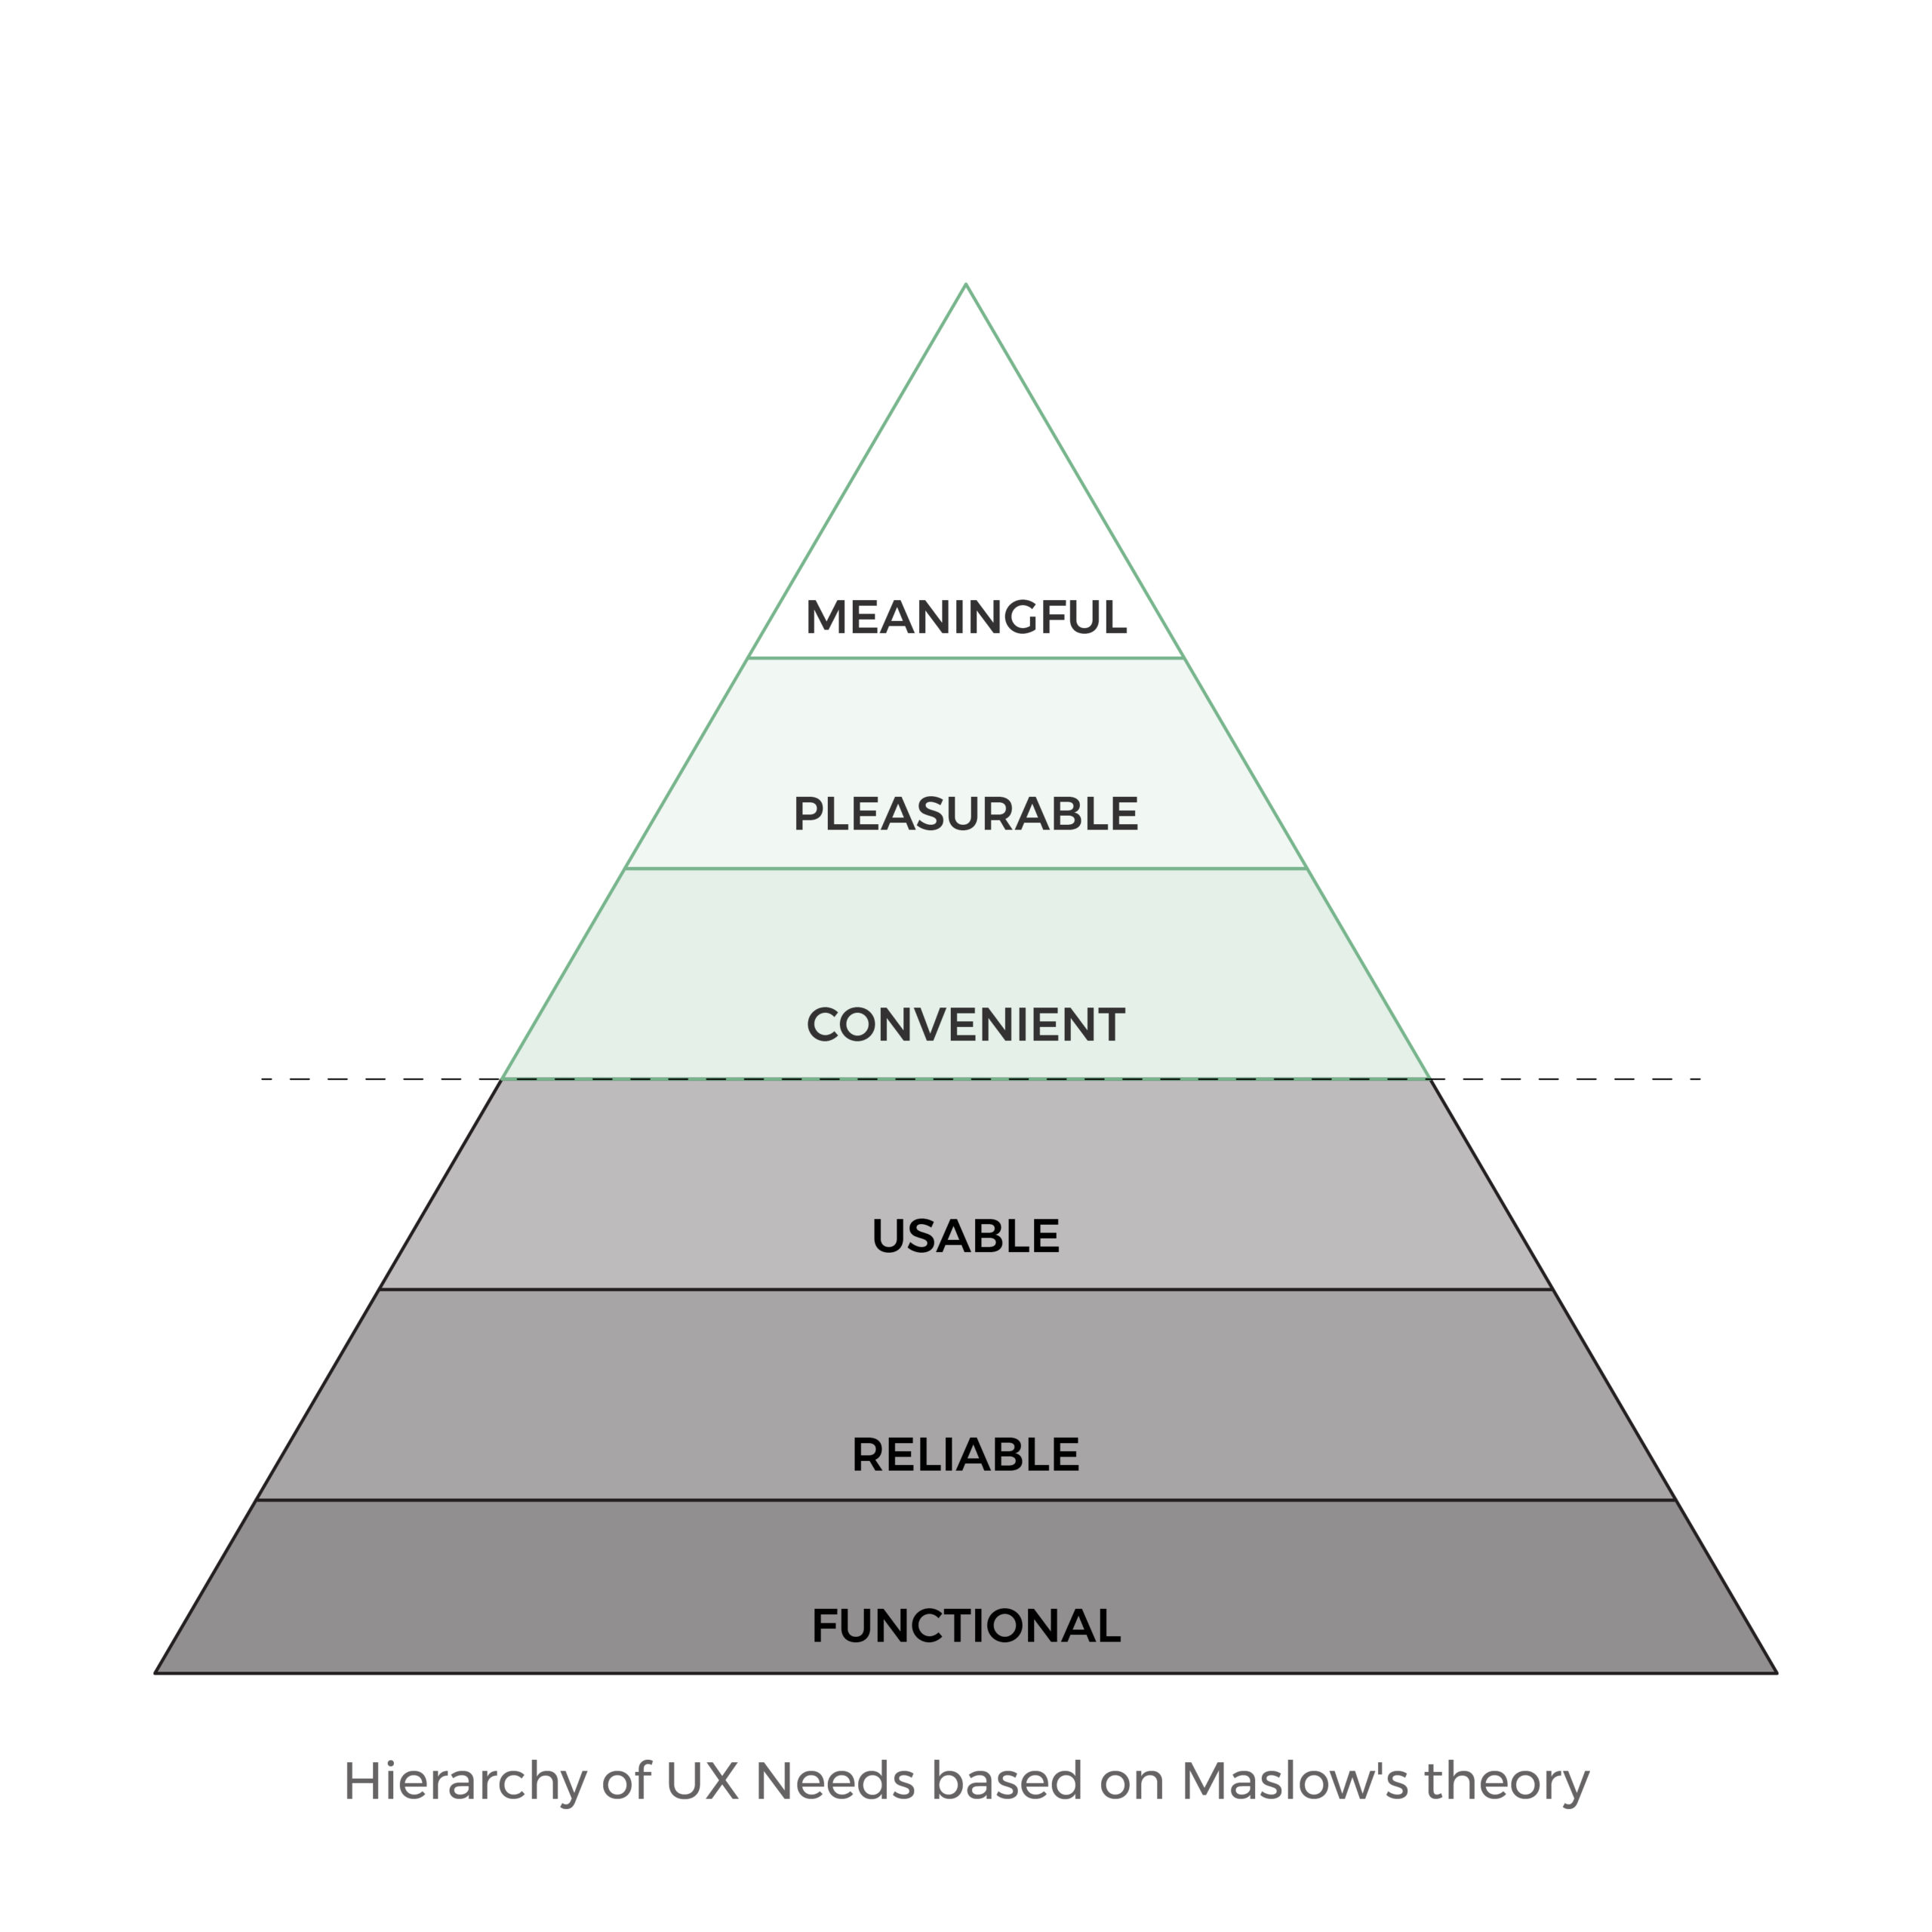 Hierarchy of UX Needs based on Maslow's theory